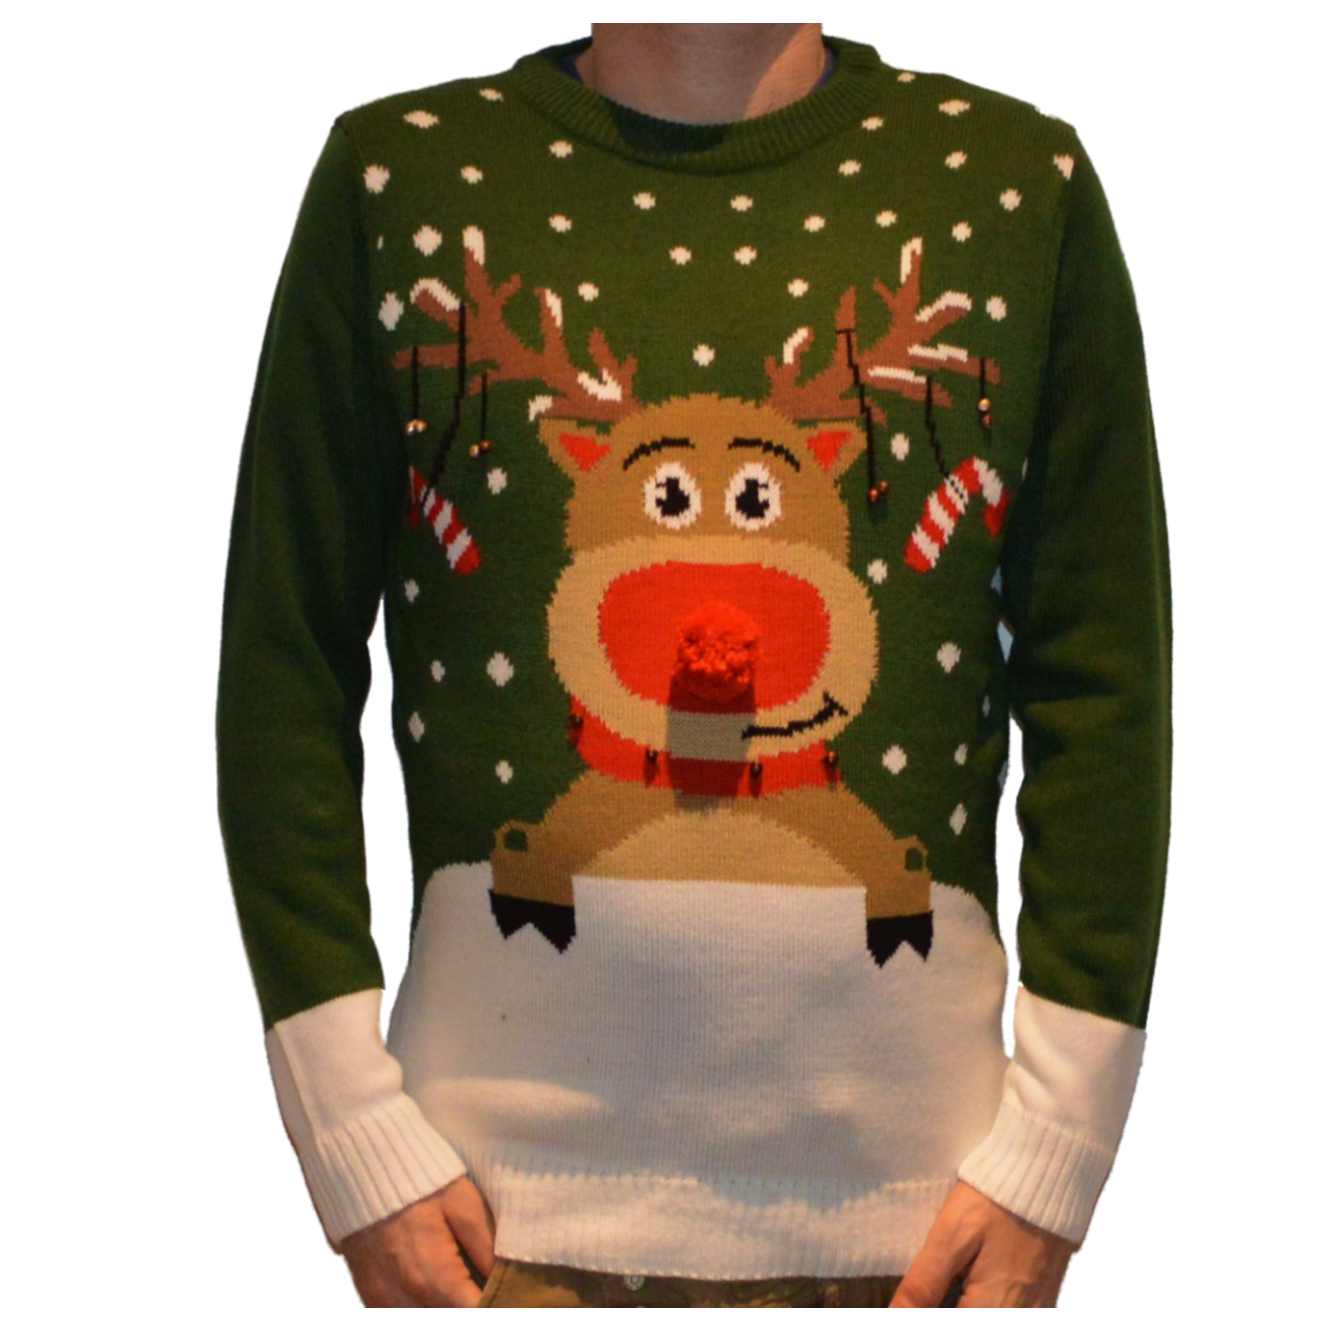 3D Knitted Christmas Jumper in S, M, L, XL or XXL Winter Festive